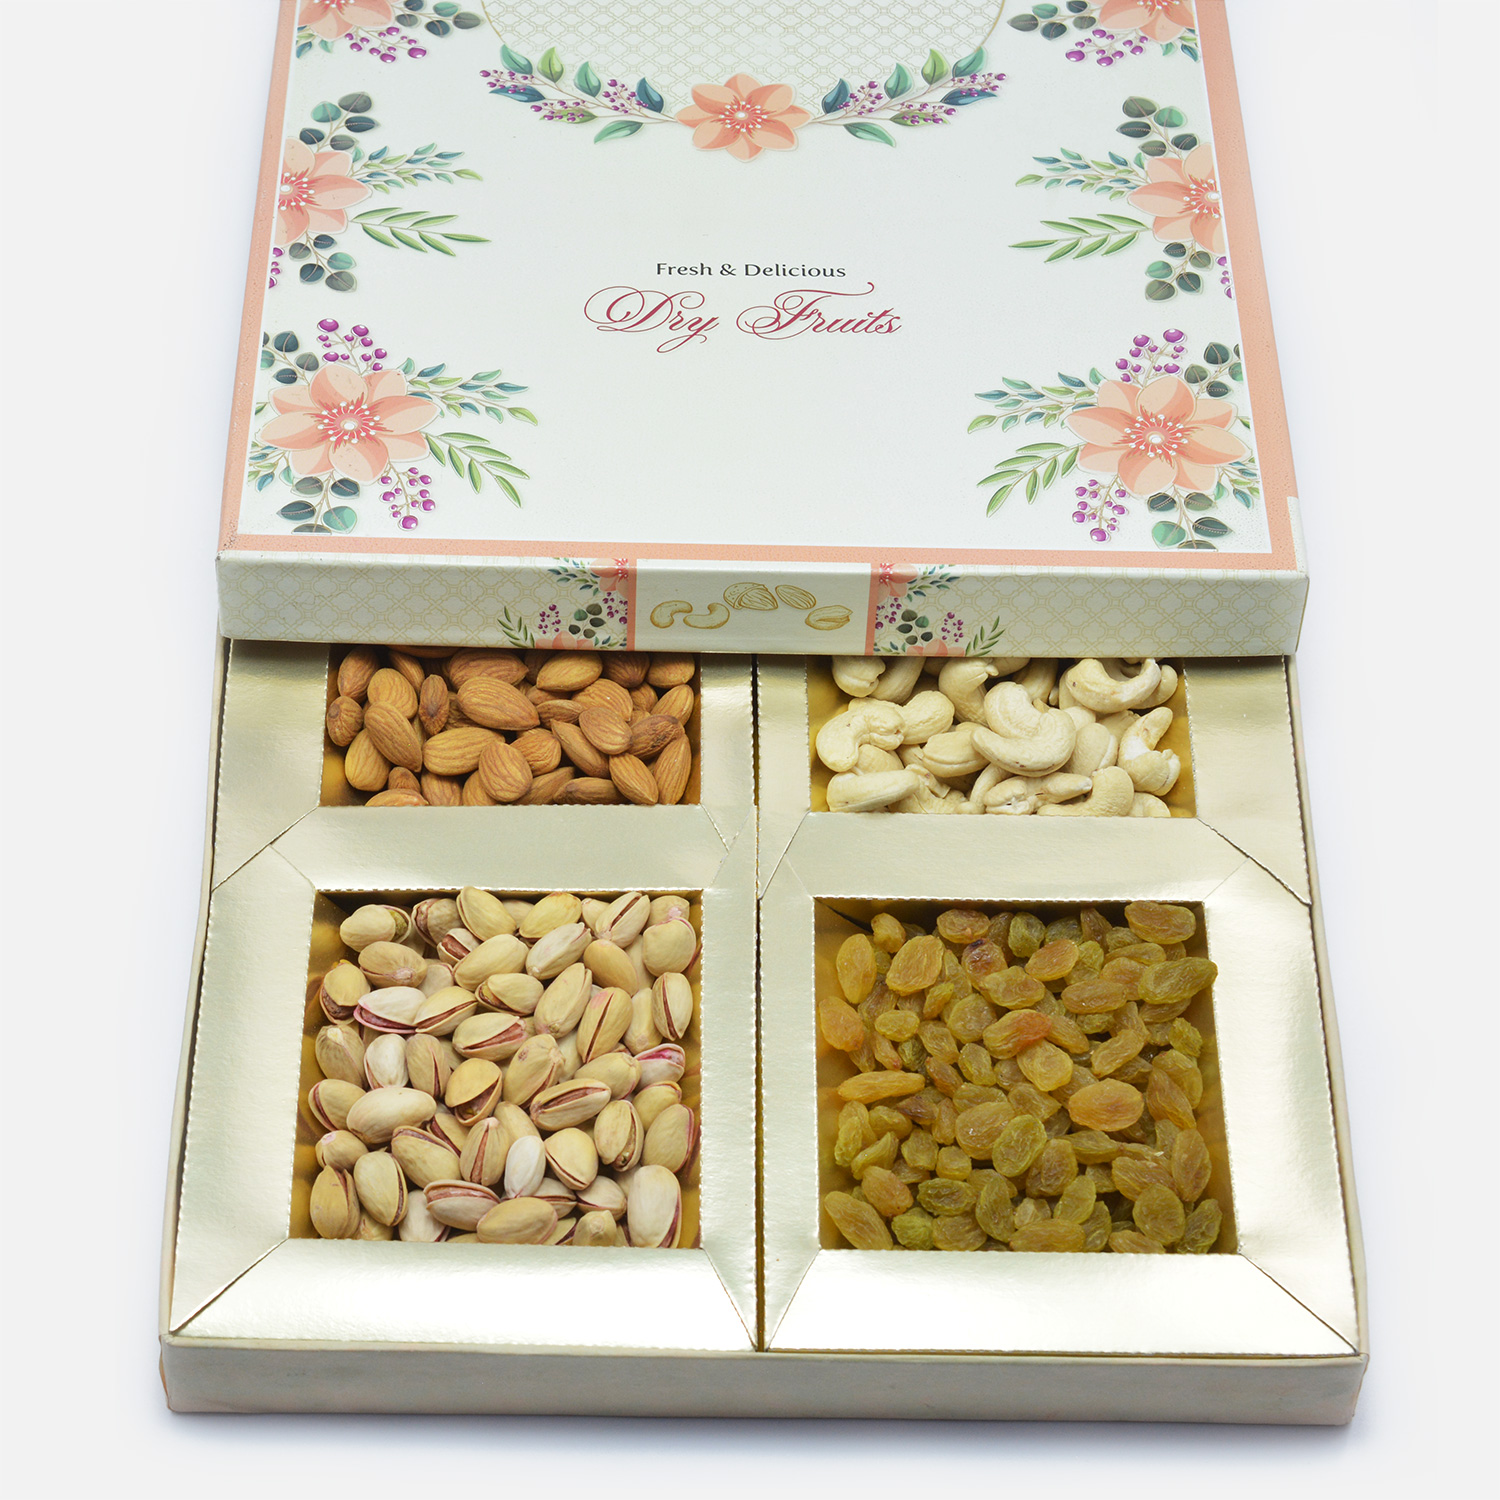 Traditional Taste of Dried Fruits - 4 Type of dry fruit box